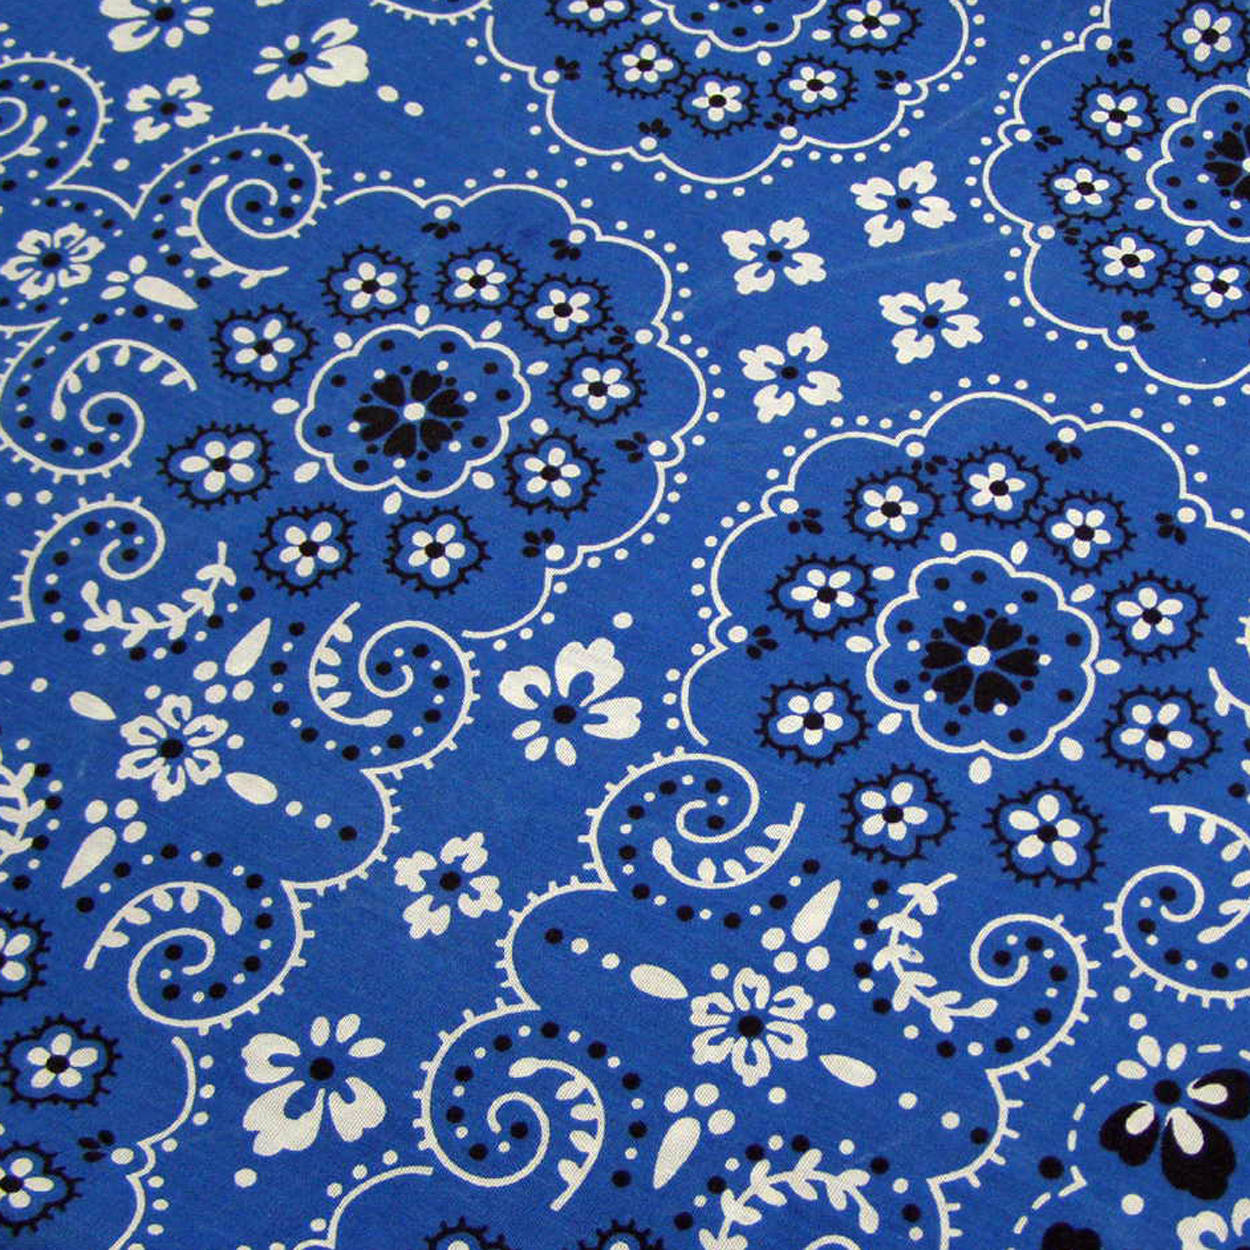 Classic Blue Bandana with Floral Pattern Wallpaper